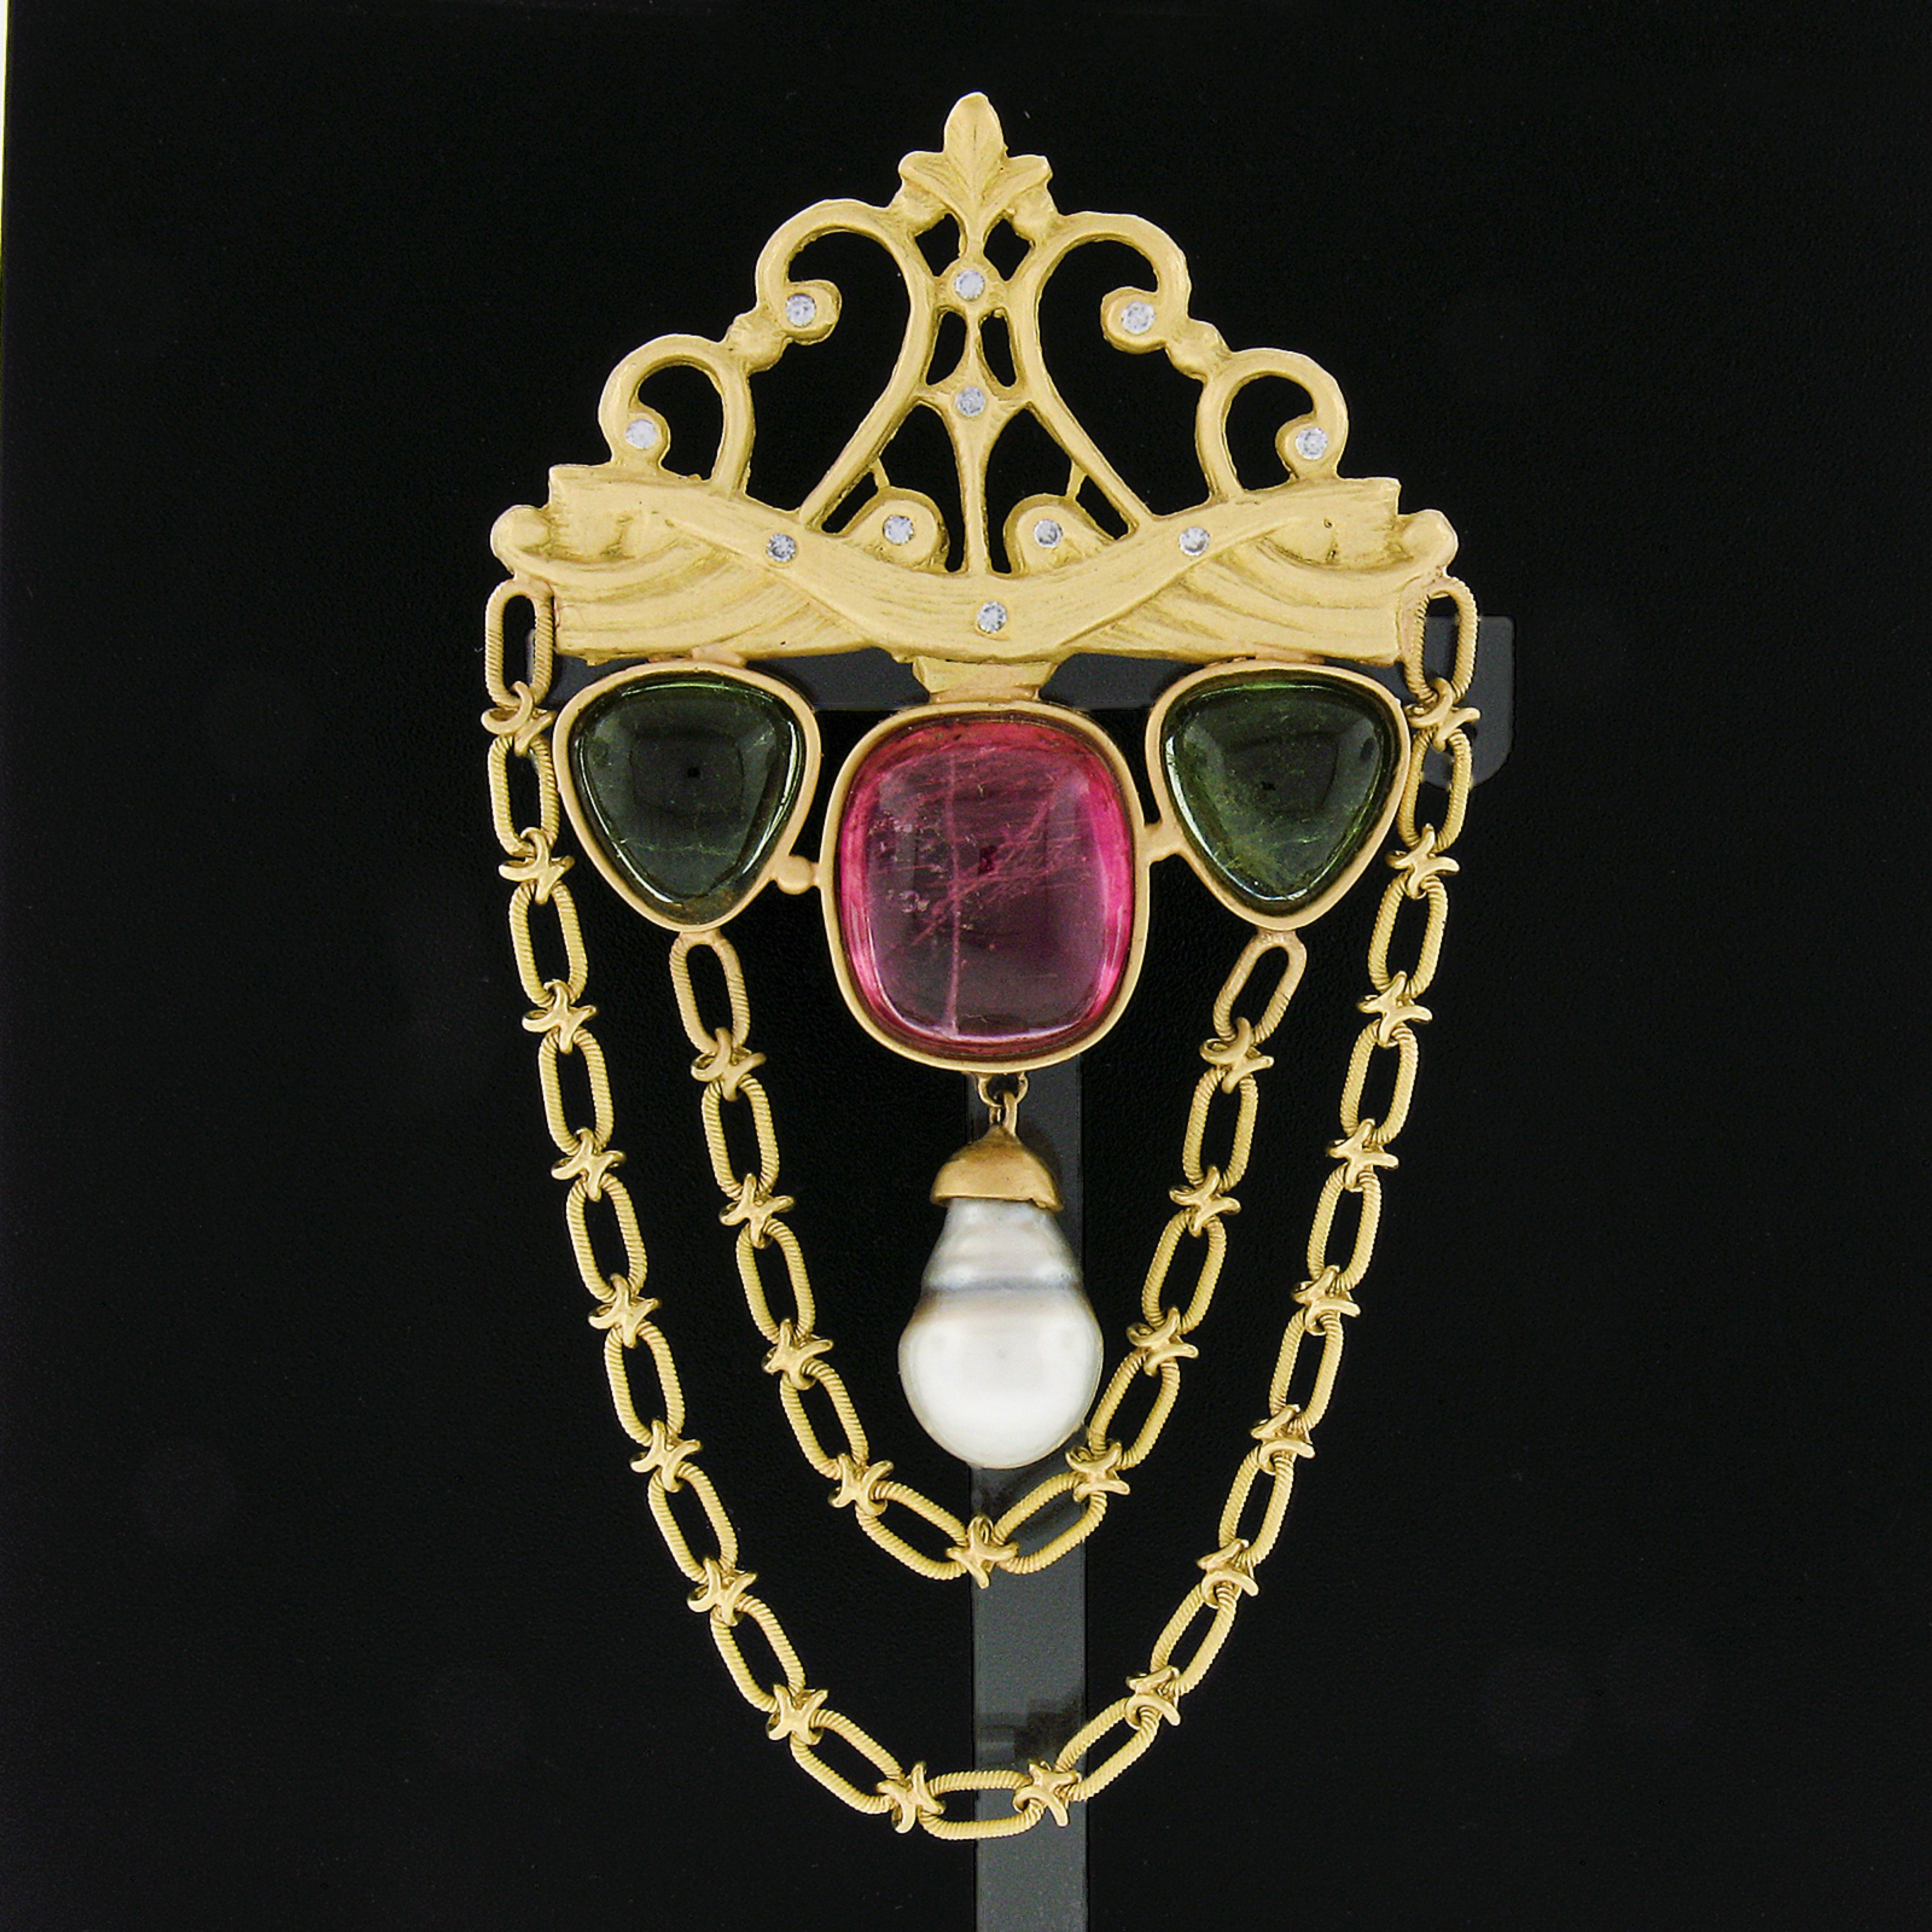 This substantial and uniquely designed pin brooch is crafted in solid 18k yellow gold and features a wonderfully detailed design adorned with cabochon cut pink and green tourmaline stones that are large and rich in color. Two well made link chains